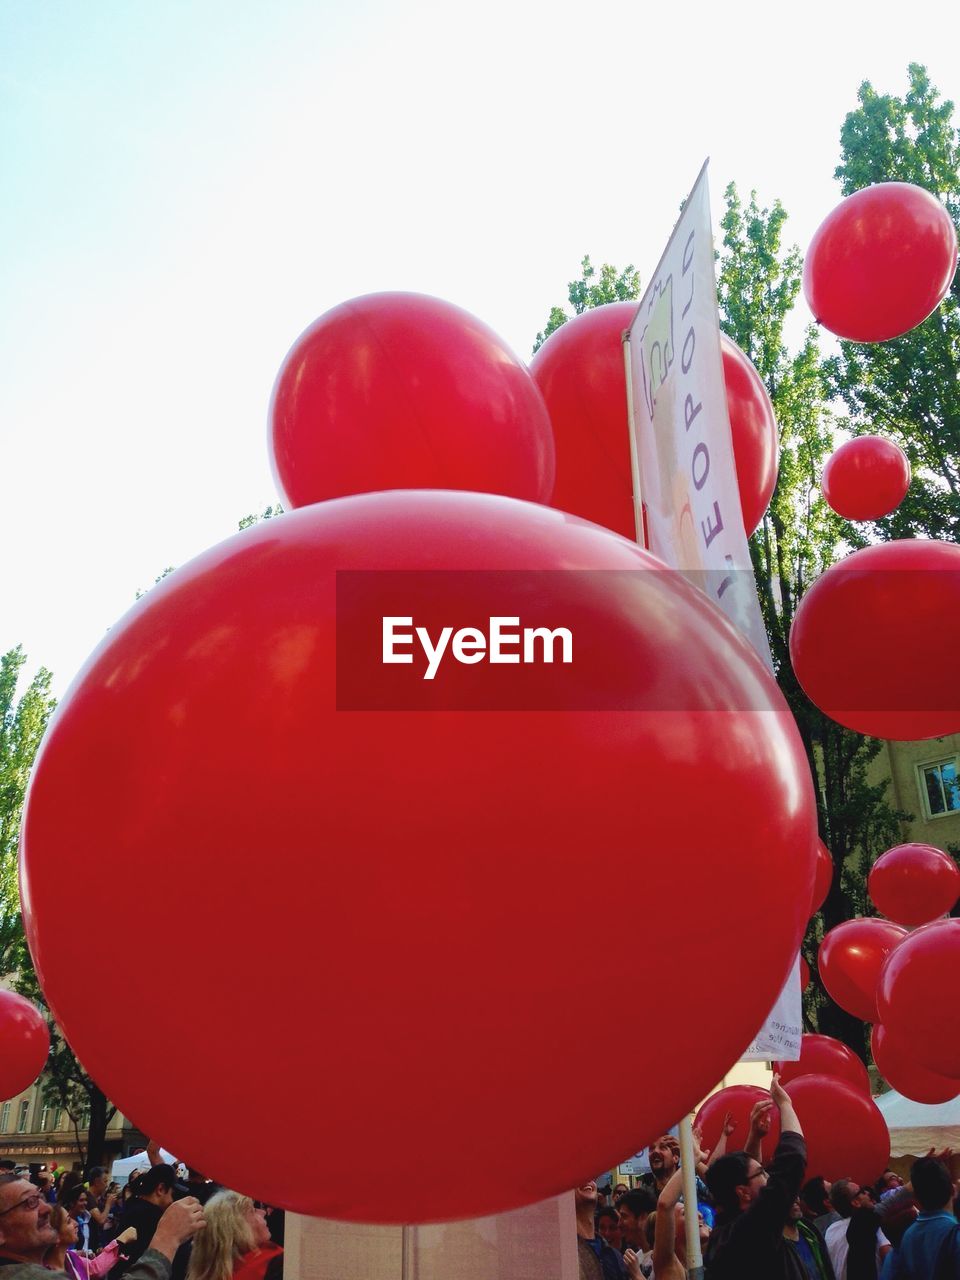 CLOSE-UP OF RED BALLOONS ON WHITE BACKGROUND